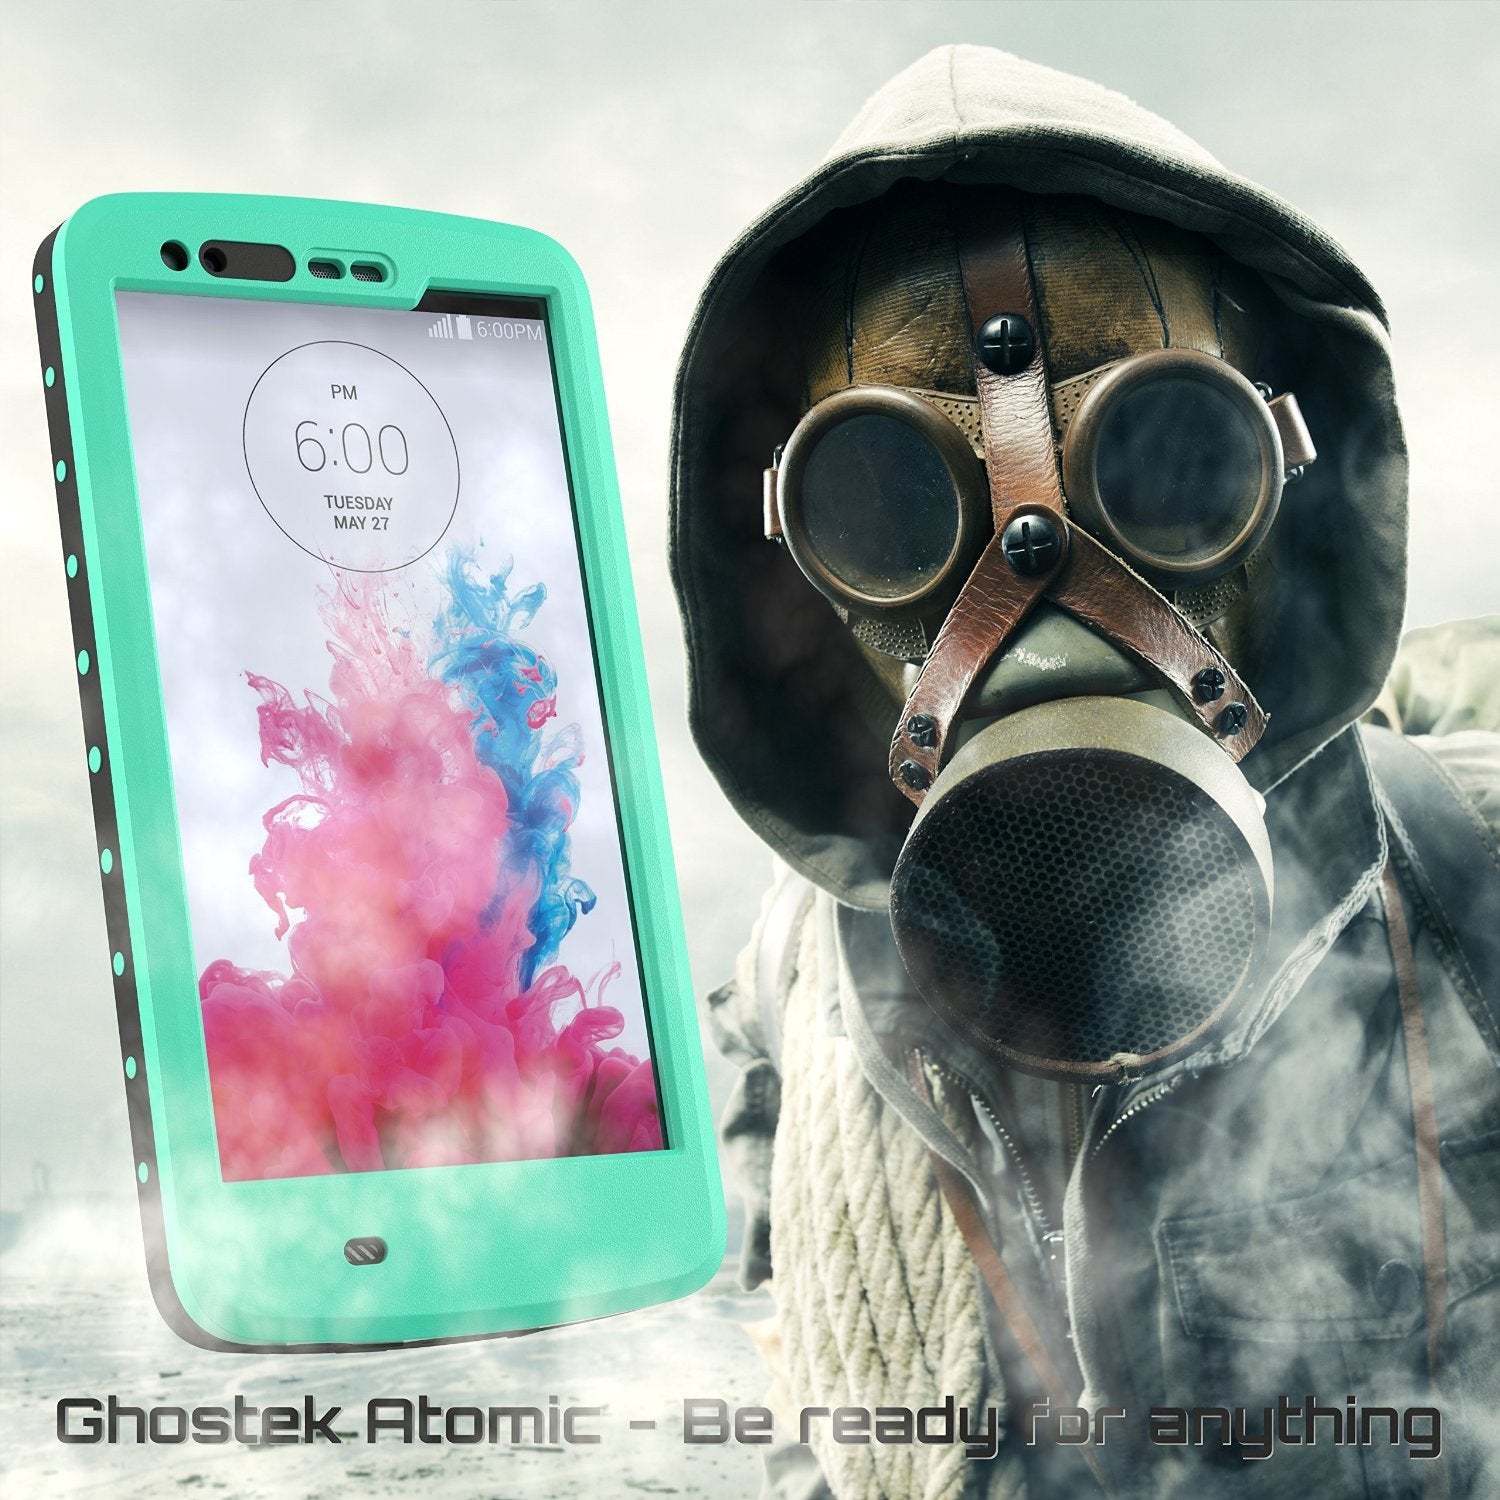 LG G3 Waterproof Case, Ghostek Atomic Teal W/ Attached Screen Protector  Slim Fitted  LG G3